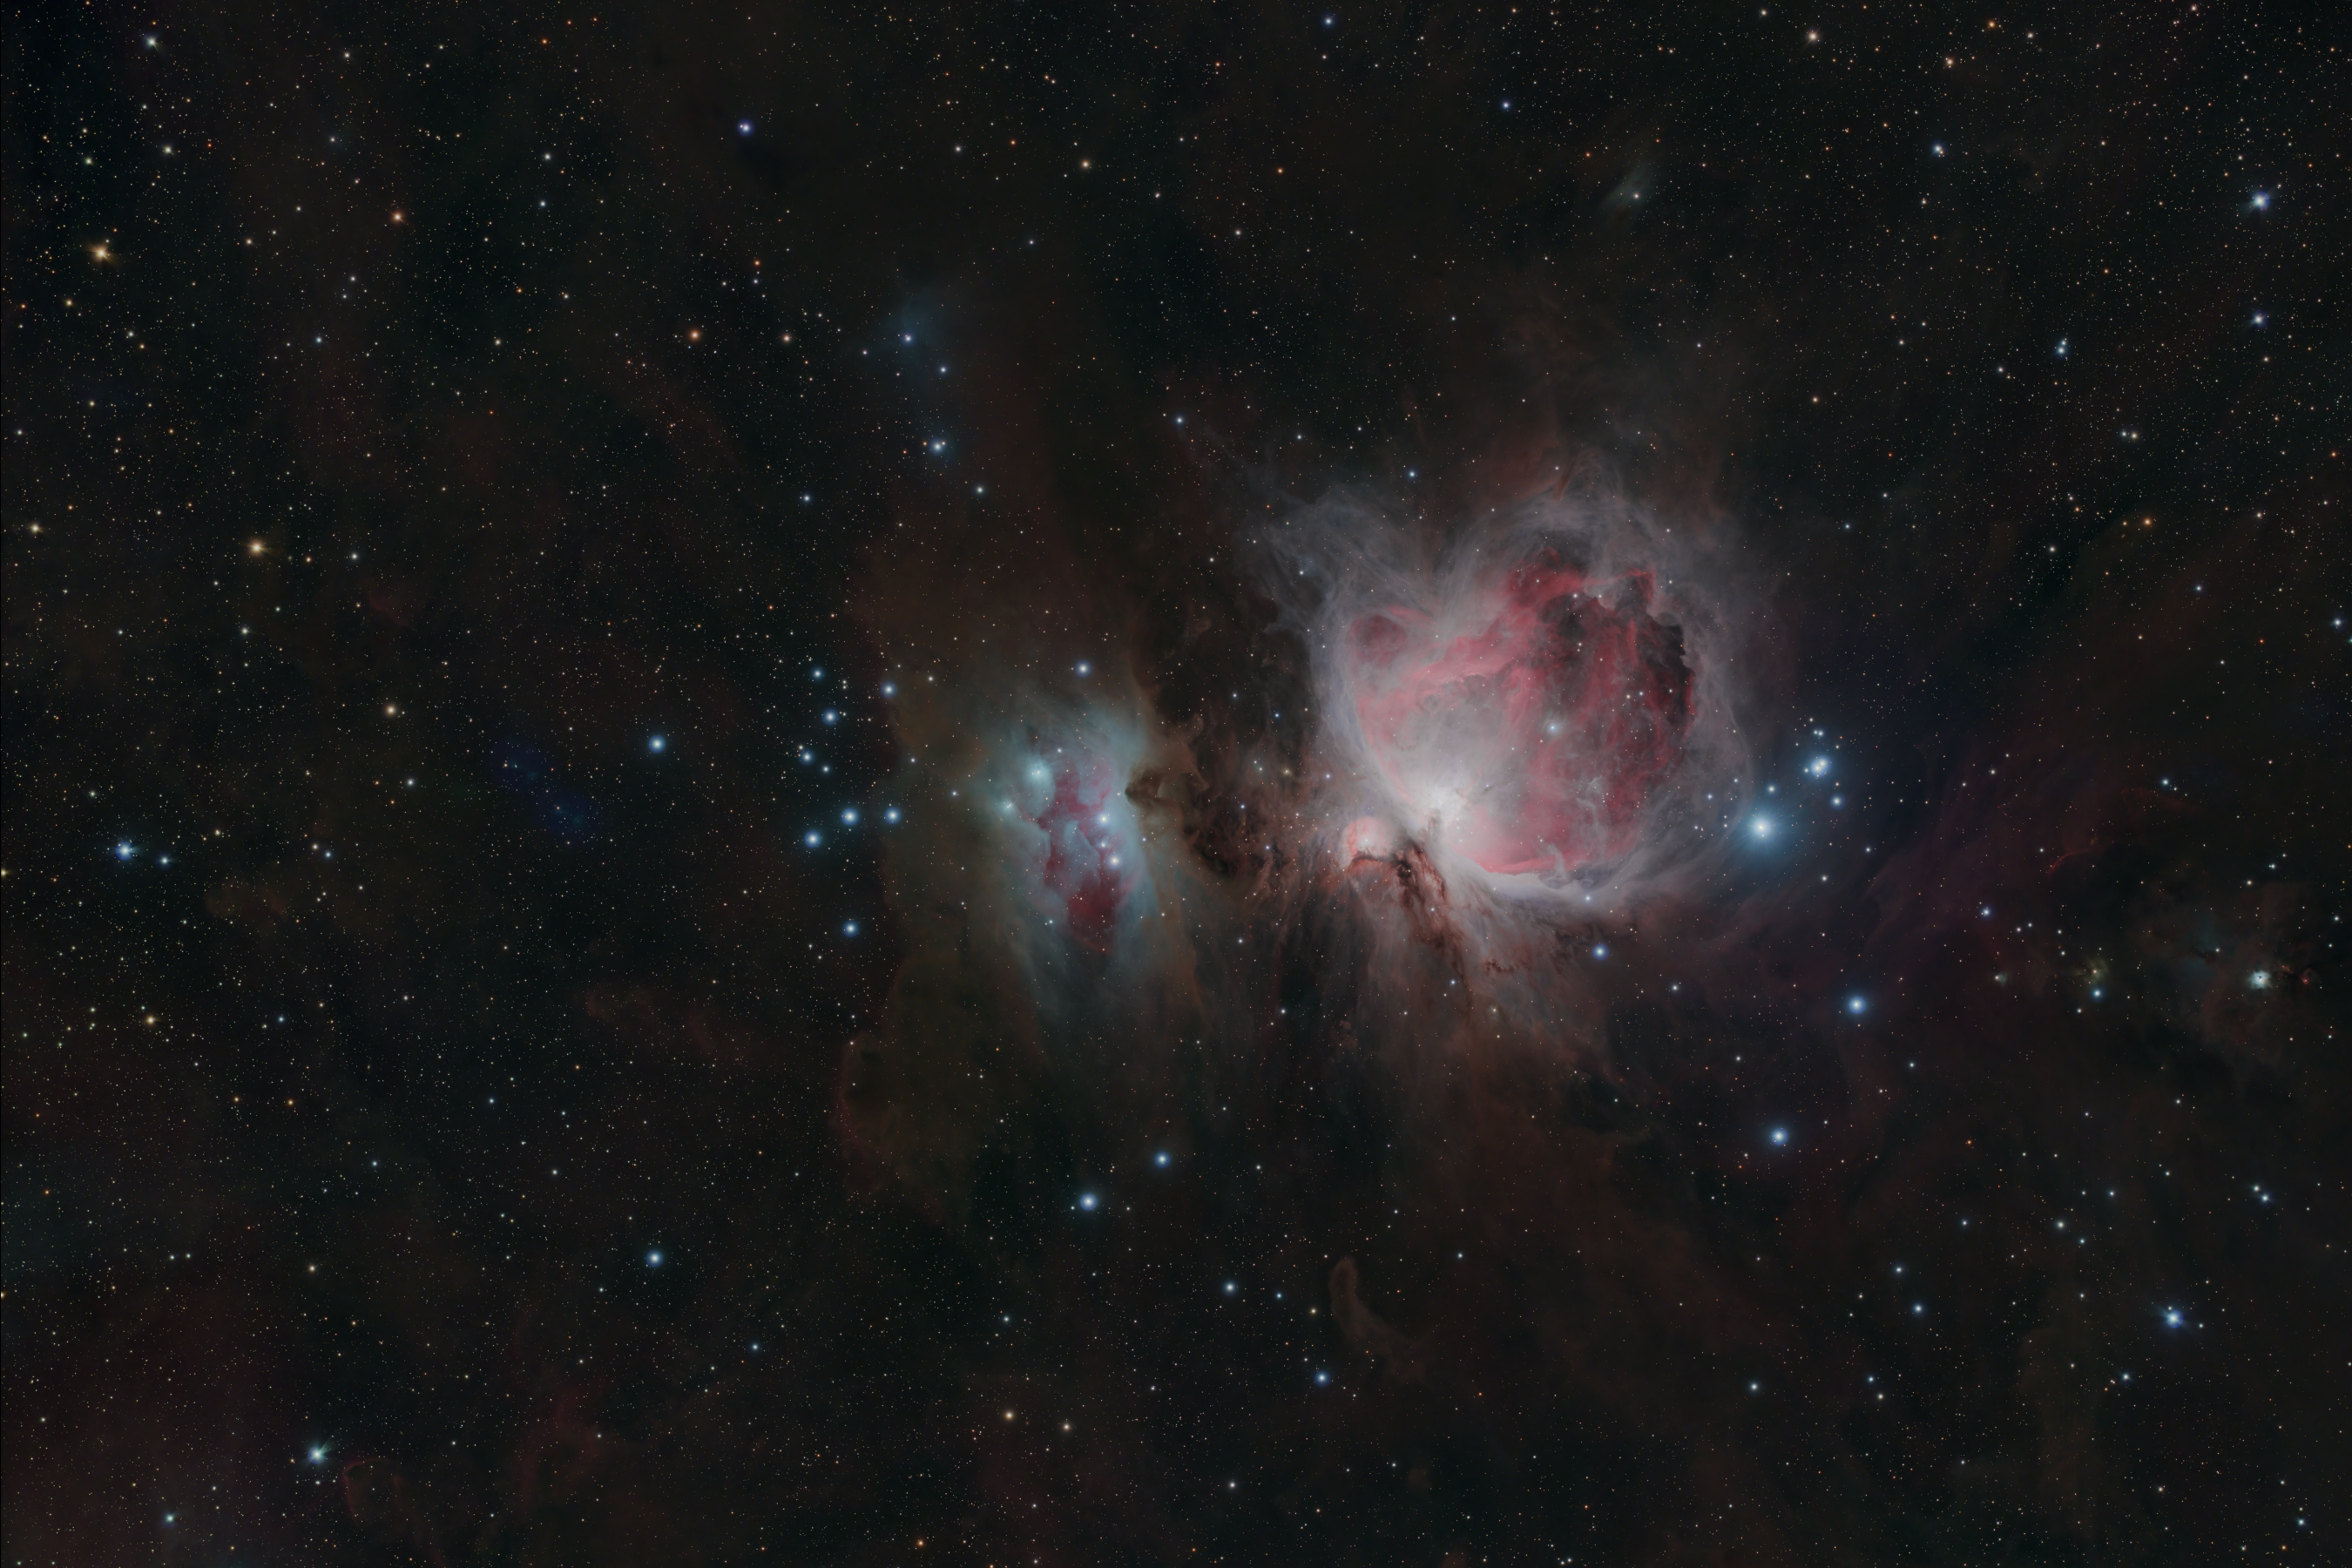 M42 in Orion